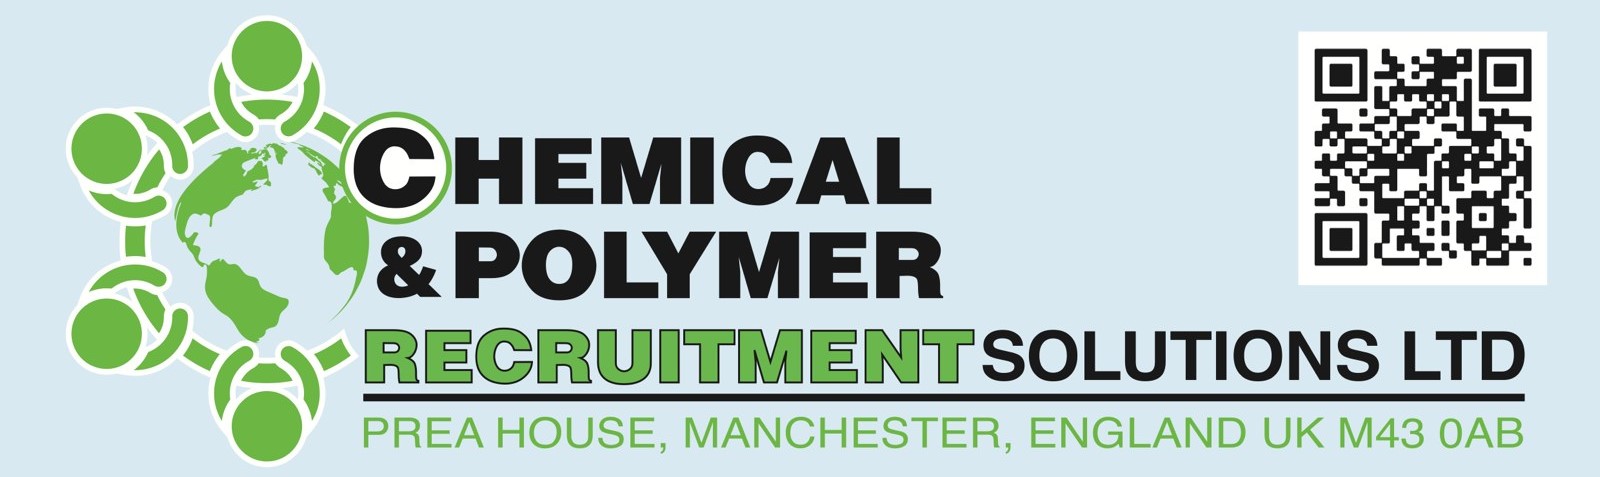 Chemical and Polymer Recruitment Solutions Ltd